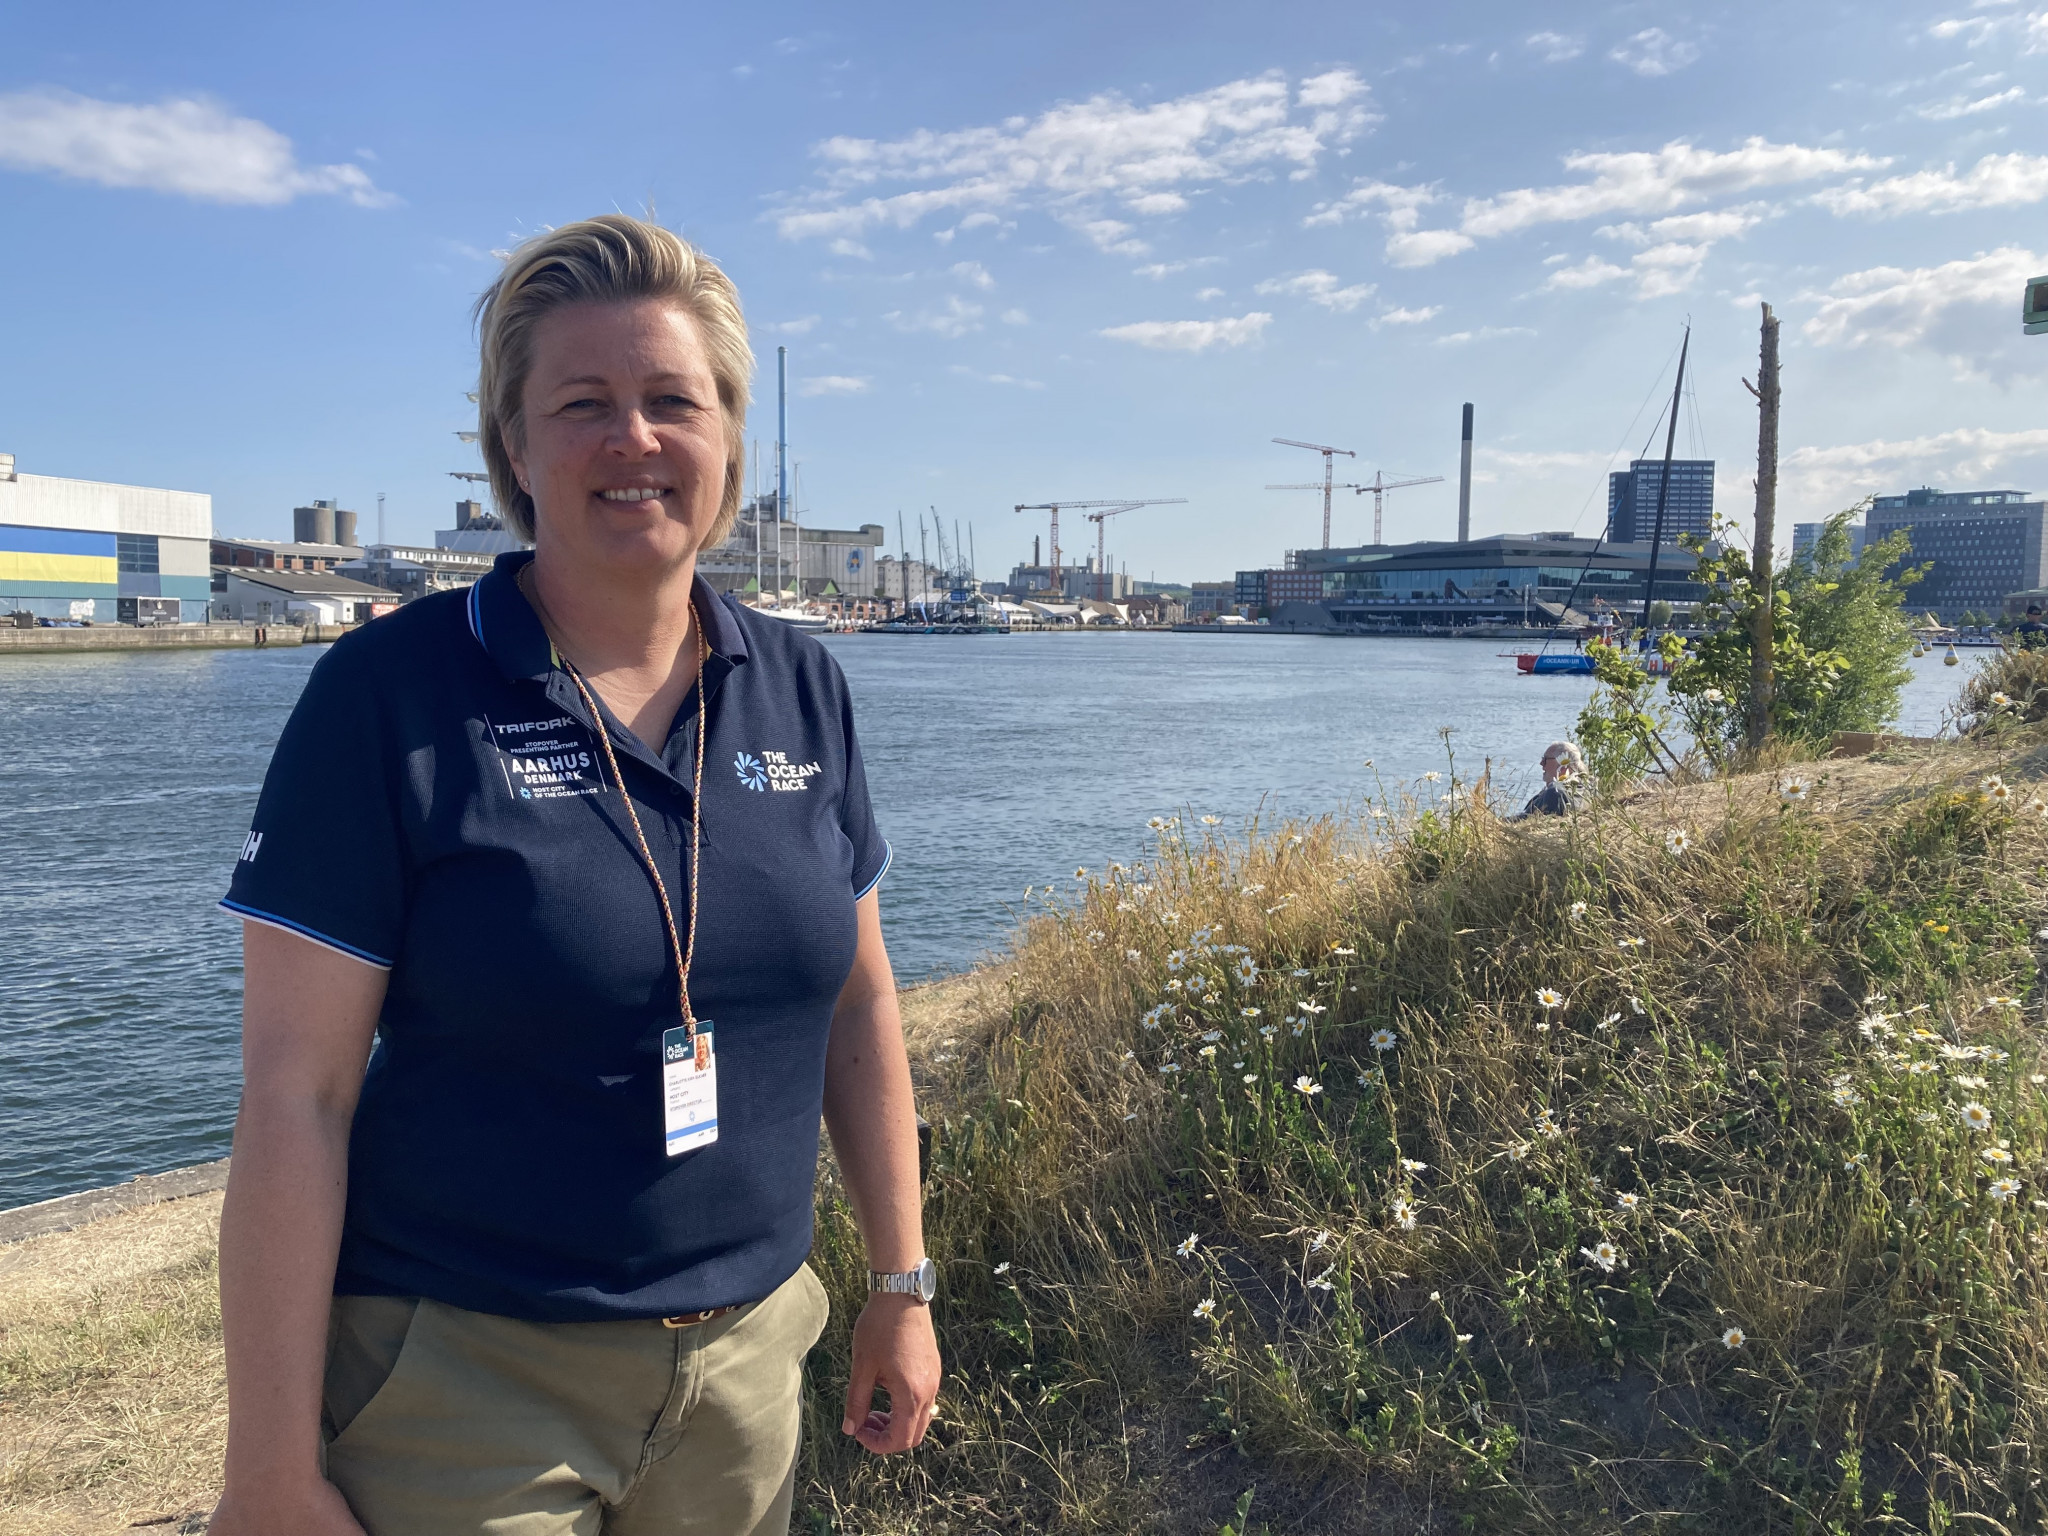 Charlotte Kirk Elkjær, a chief advisor for Aarhus Events, is hoping the Danish city can attract more top events in sports outside of sailing ©ITG